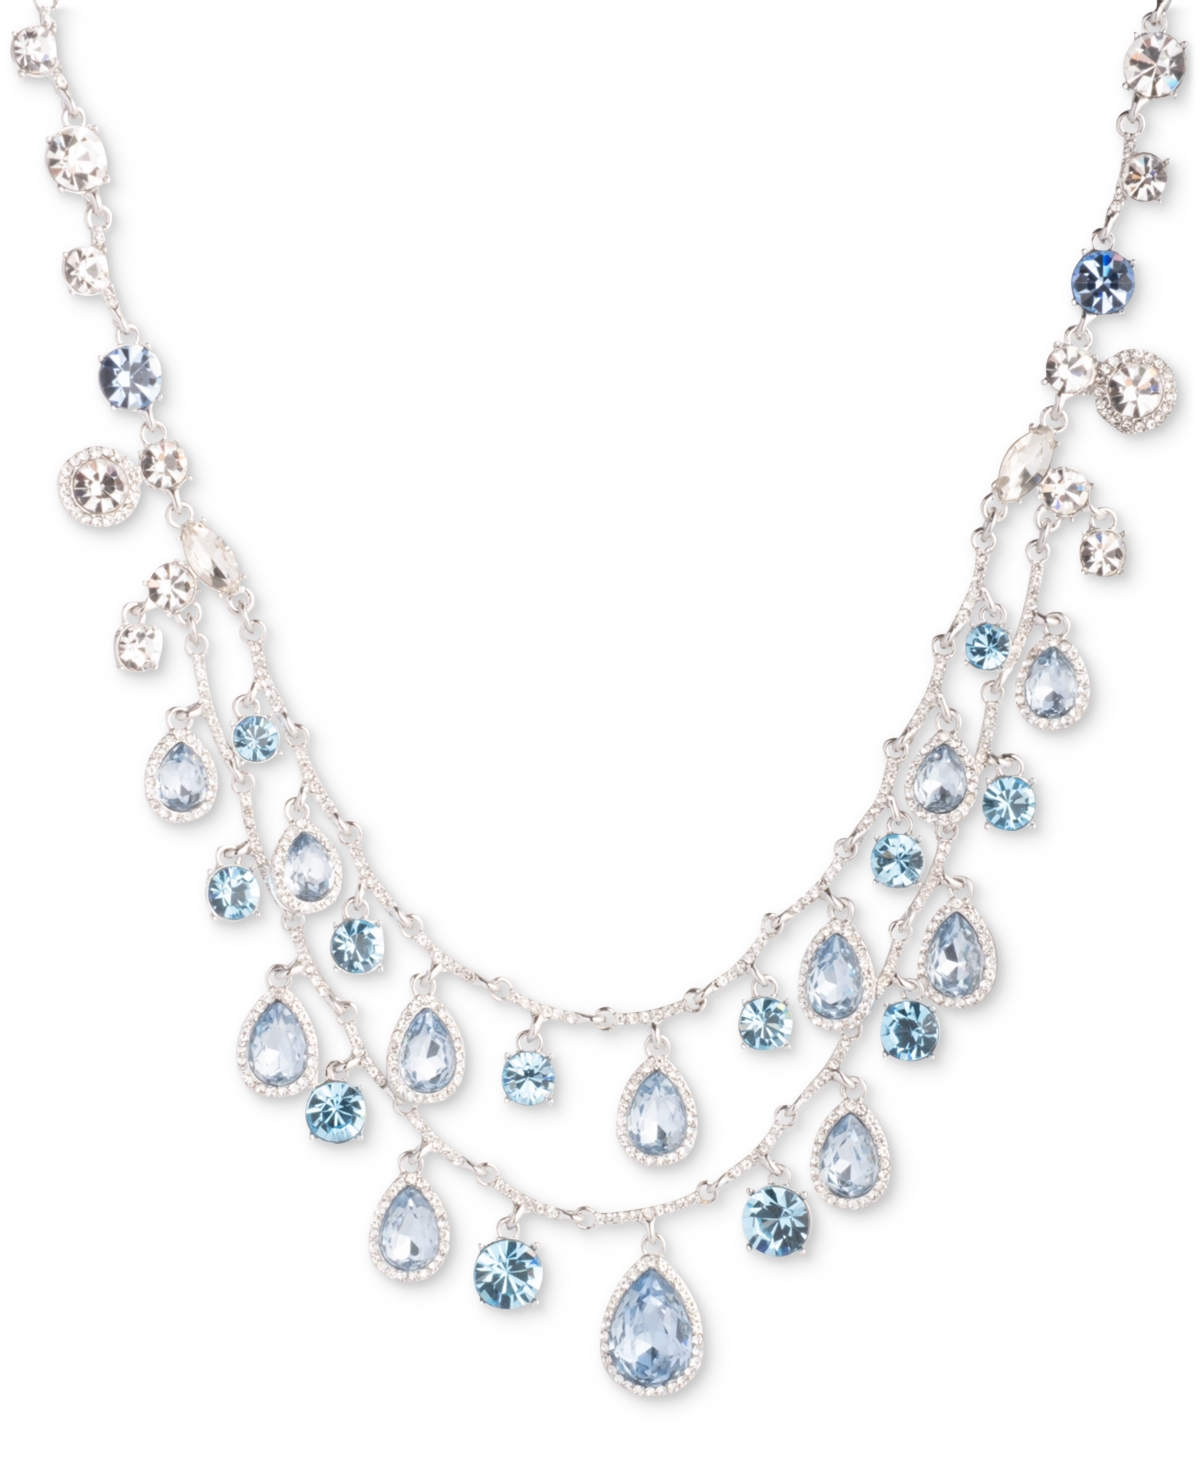 Silver-Tone Pave & Color Crystal Layered Necklace, 16" + 3" extender - Navy